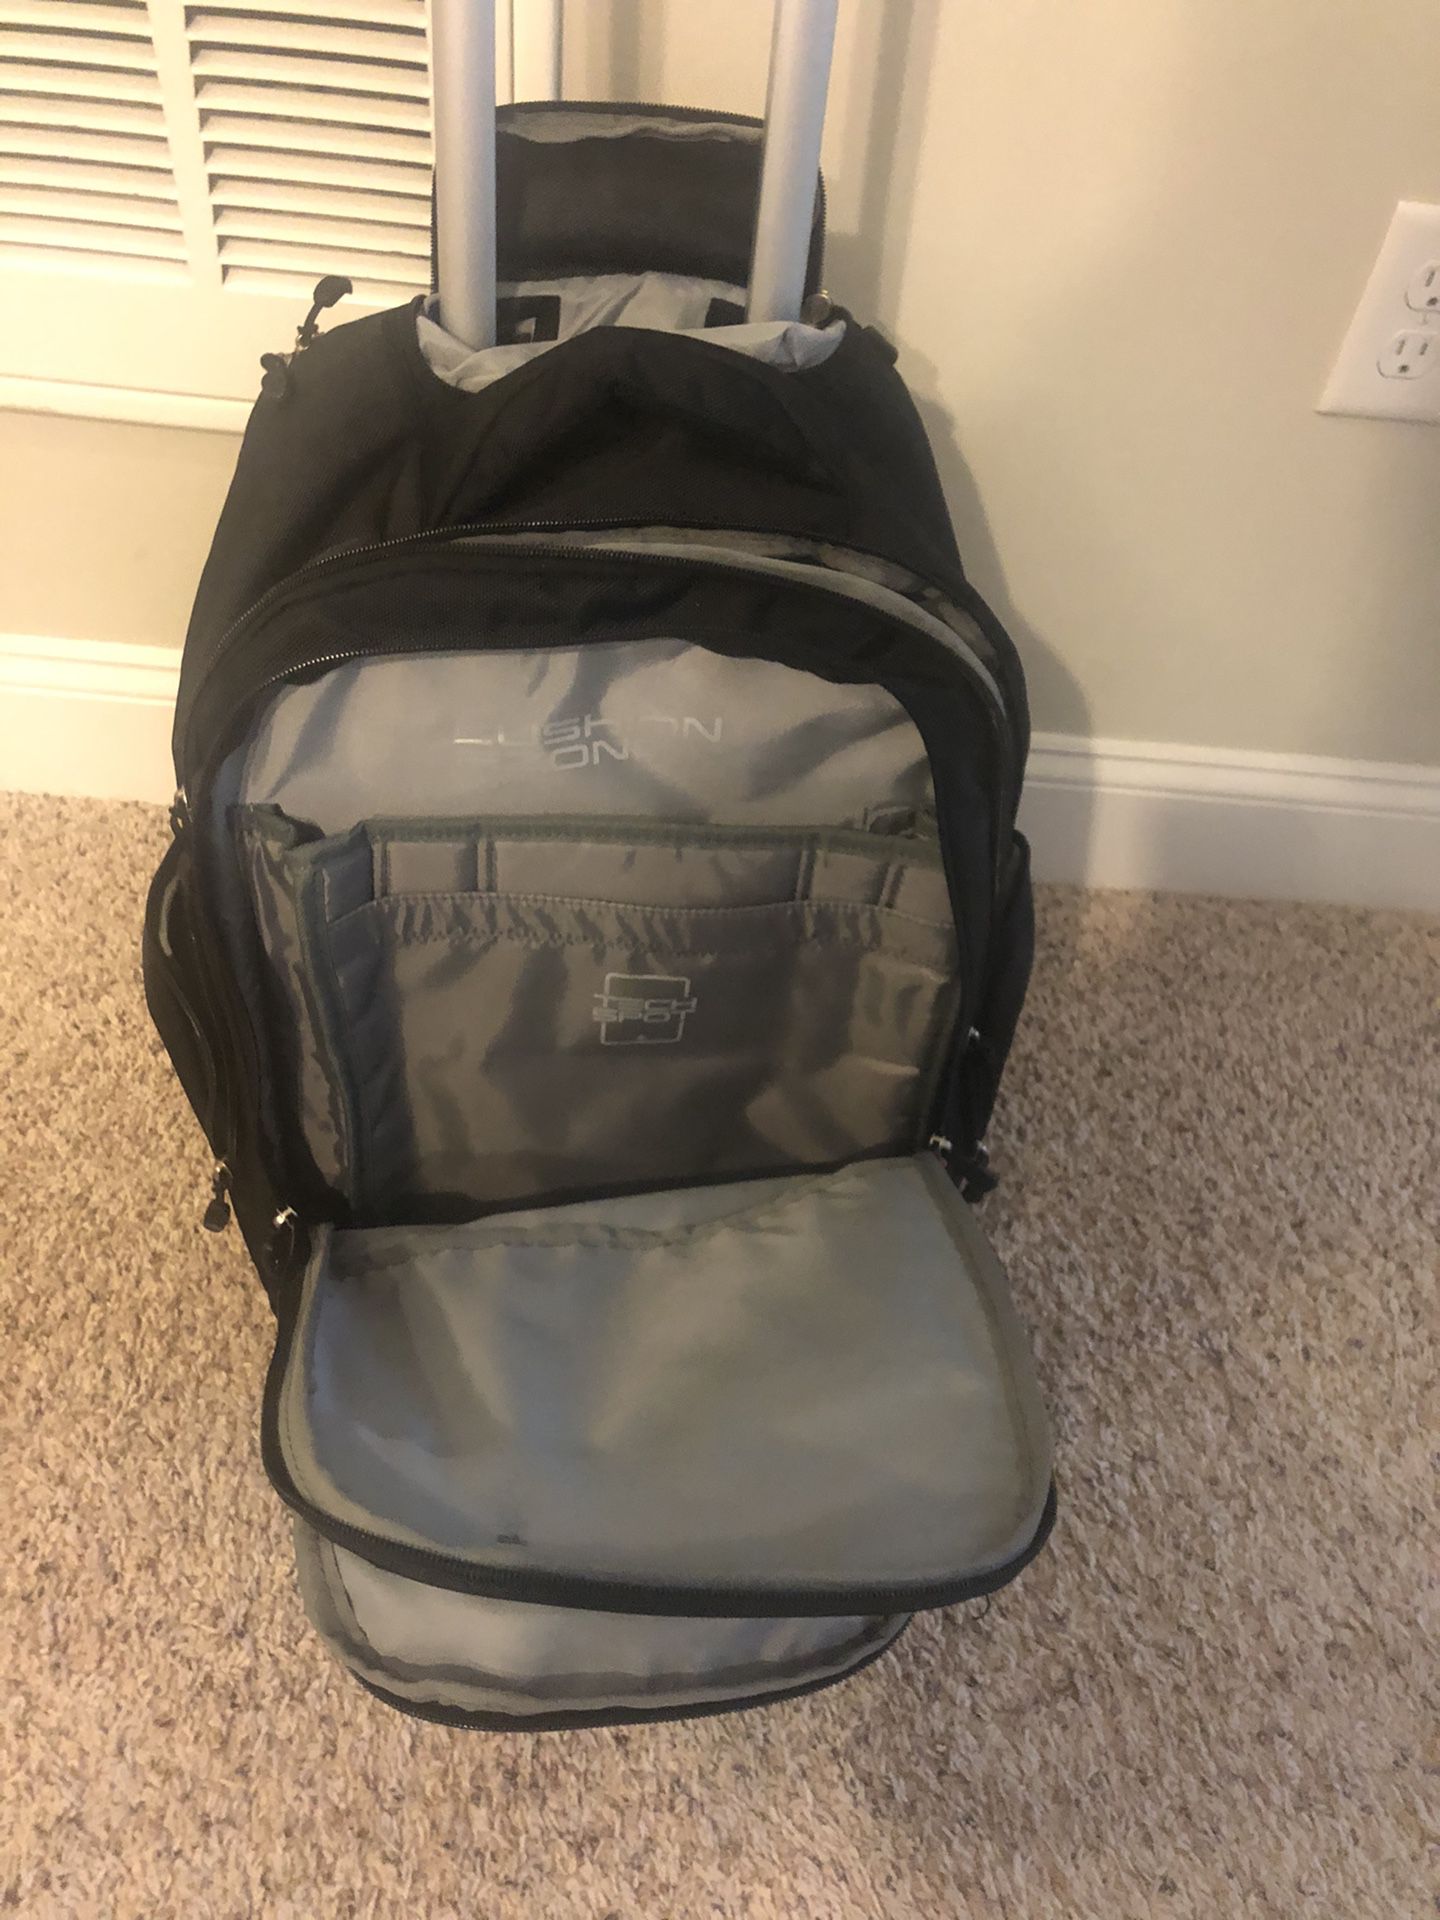 Computer Bag with Wheels Carryon